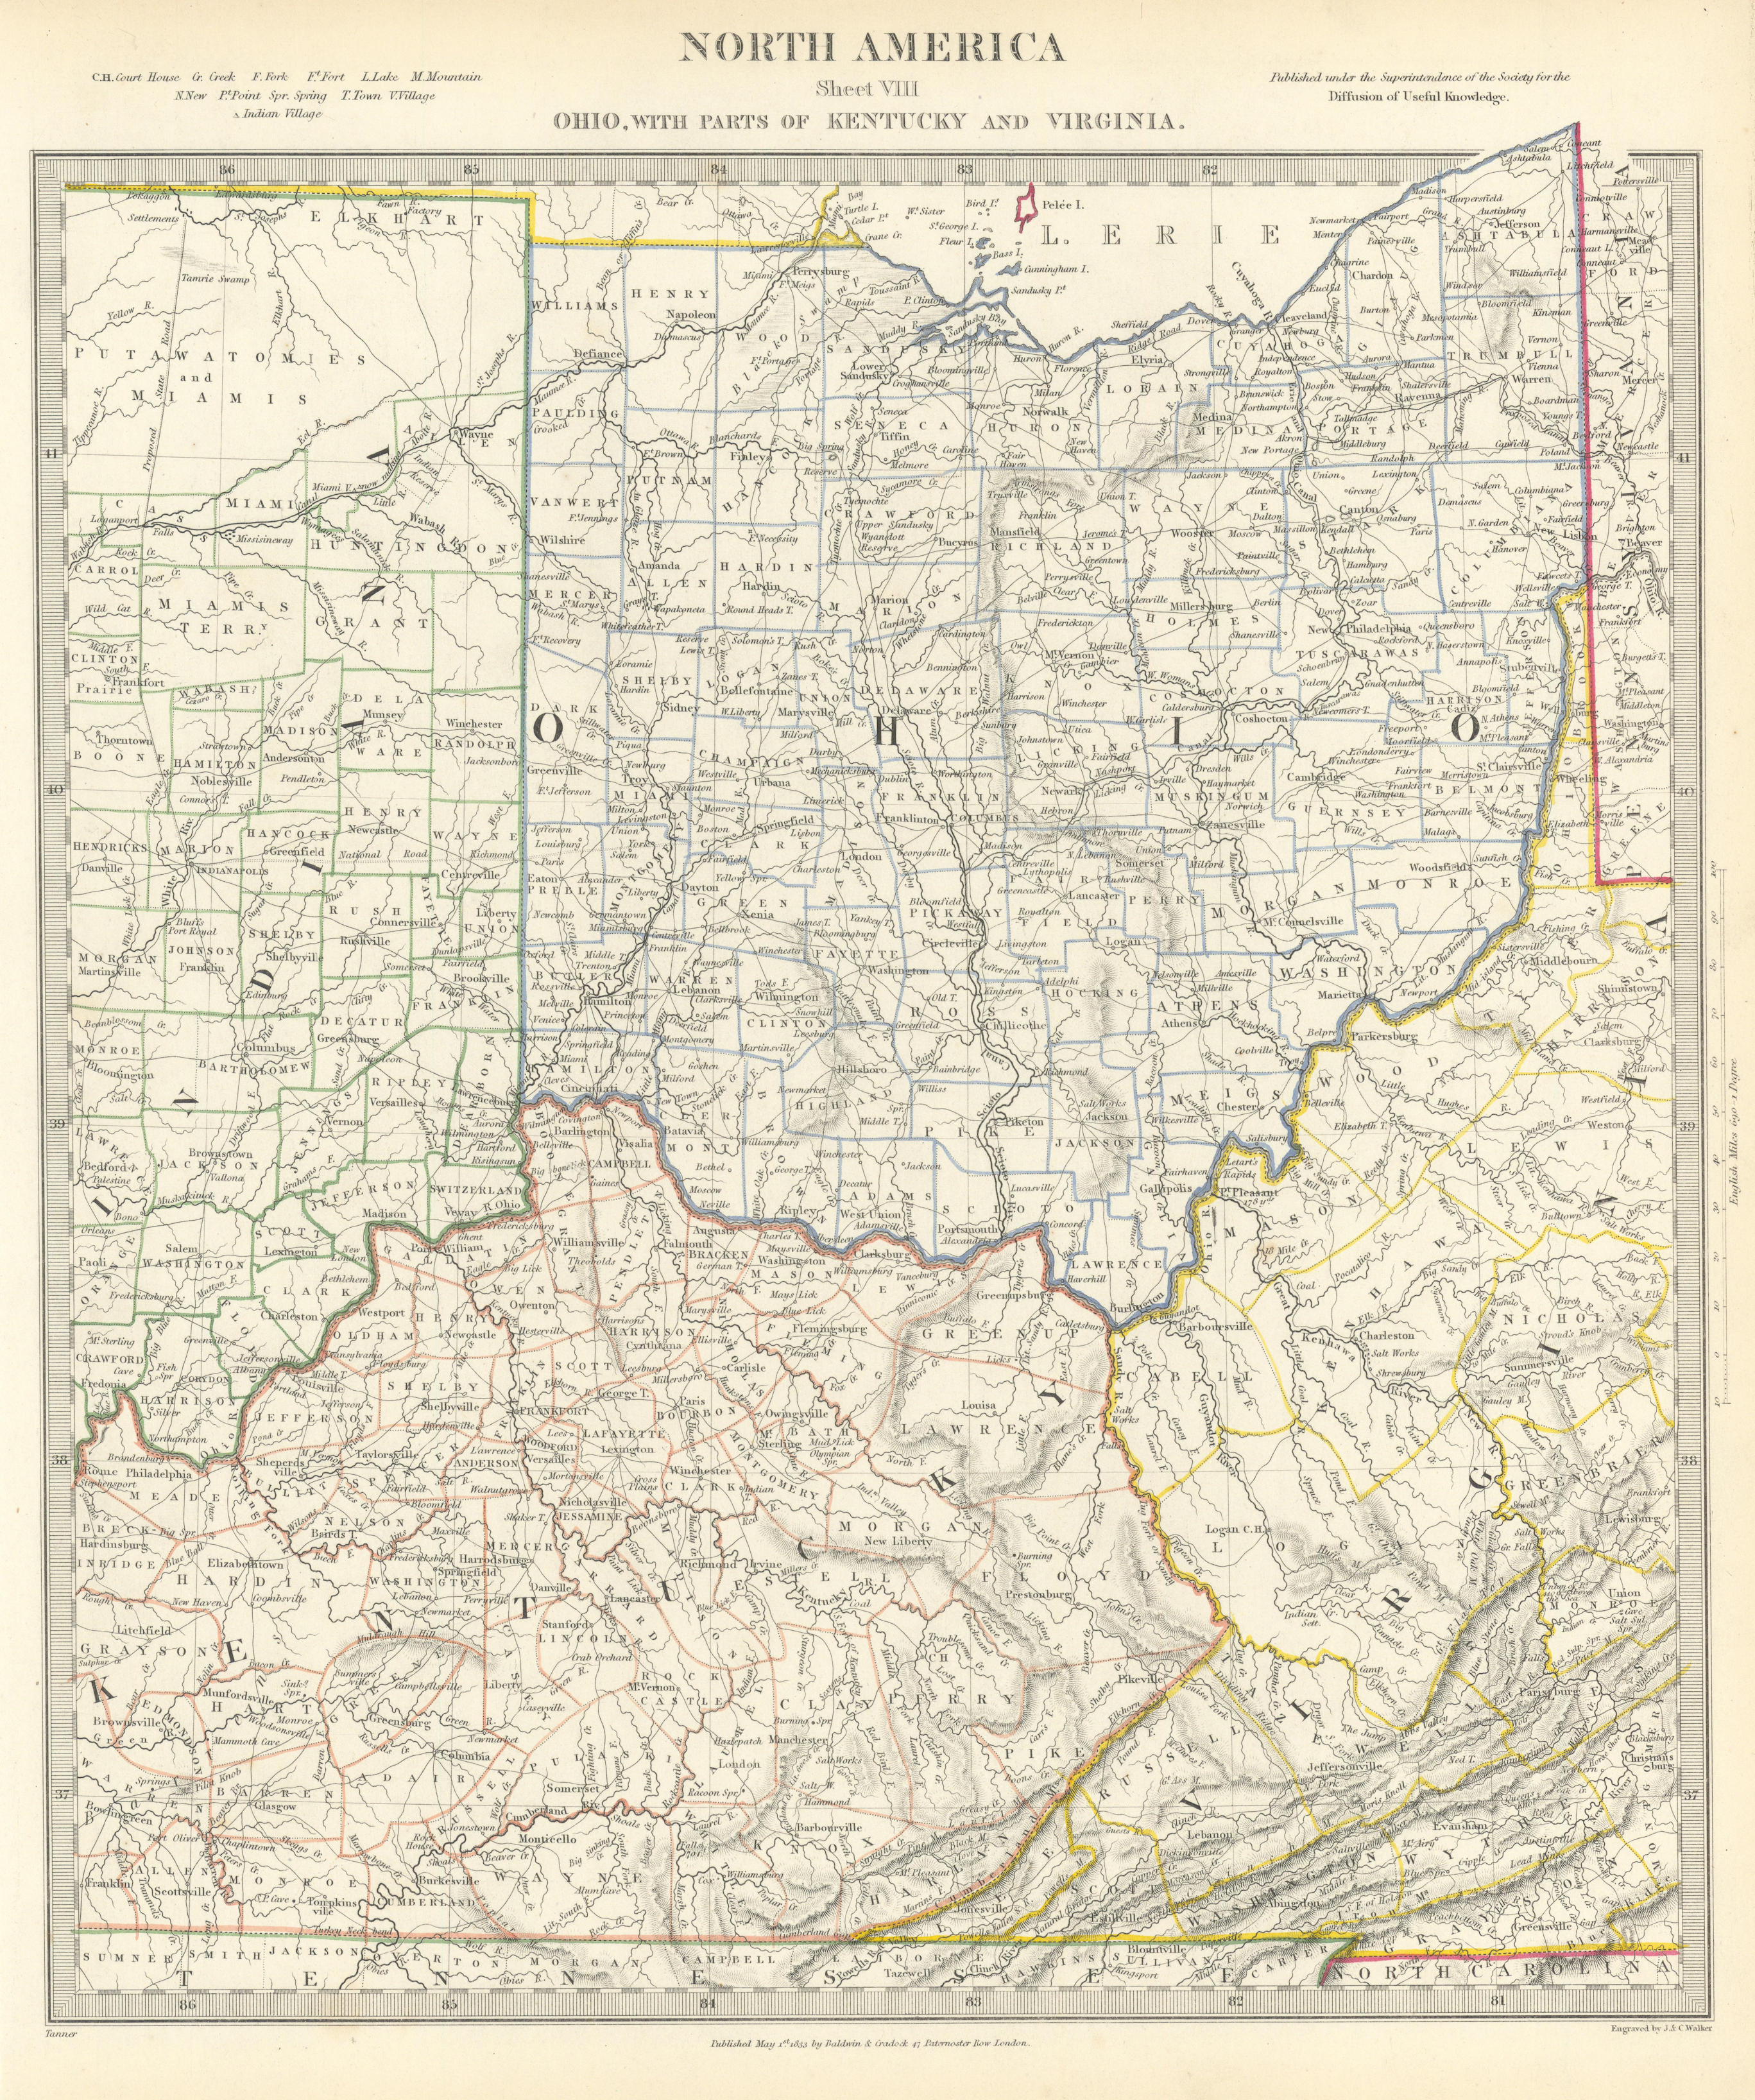 Associate Product USA. Ohio with parts of Kentucky, Virginia & Indiana. Counties. SDUK 1844 map